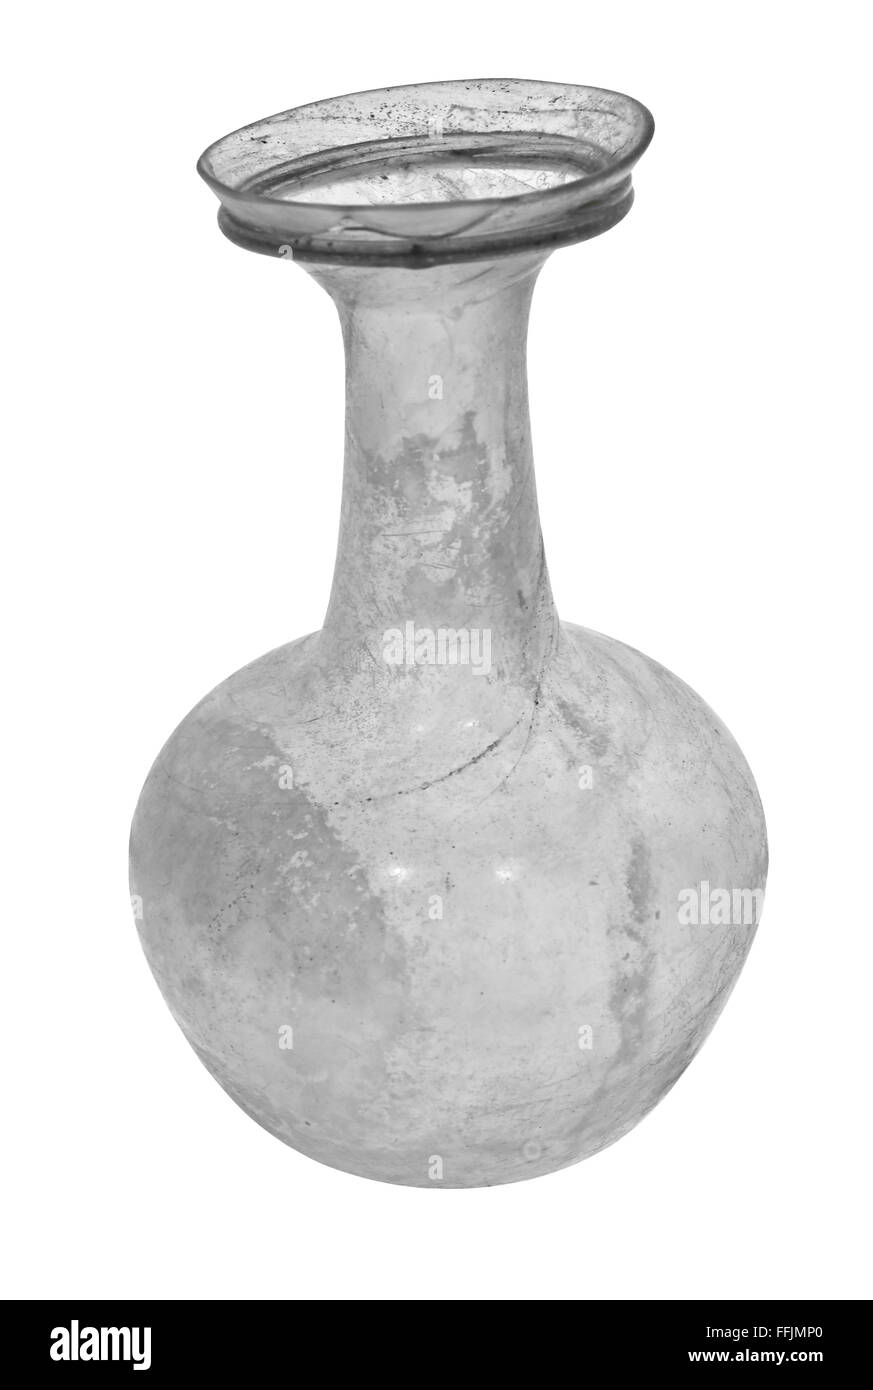 Ancient roman vase in clear glass with spherical bowl. Isolated on a white background Stock Photo